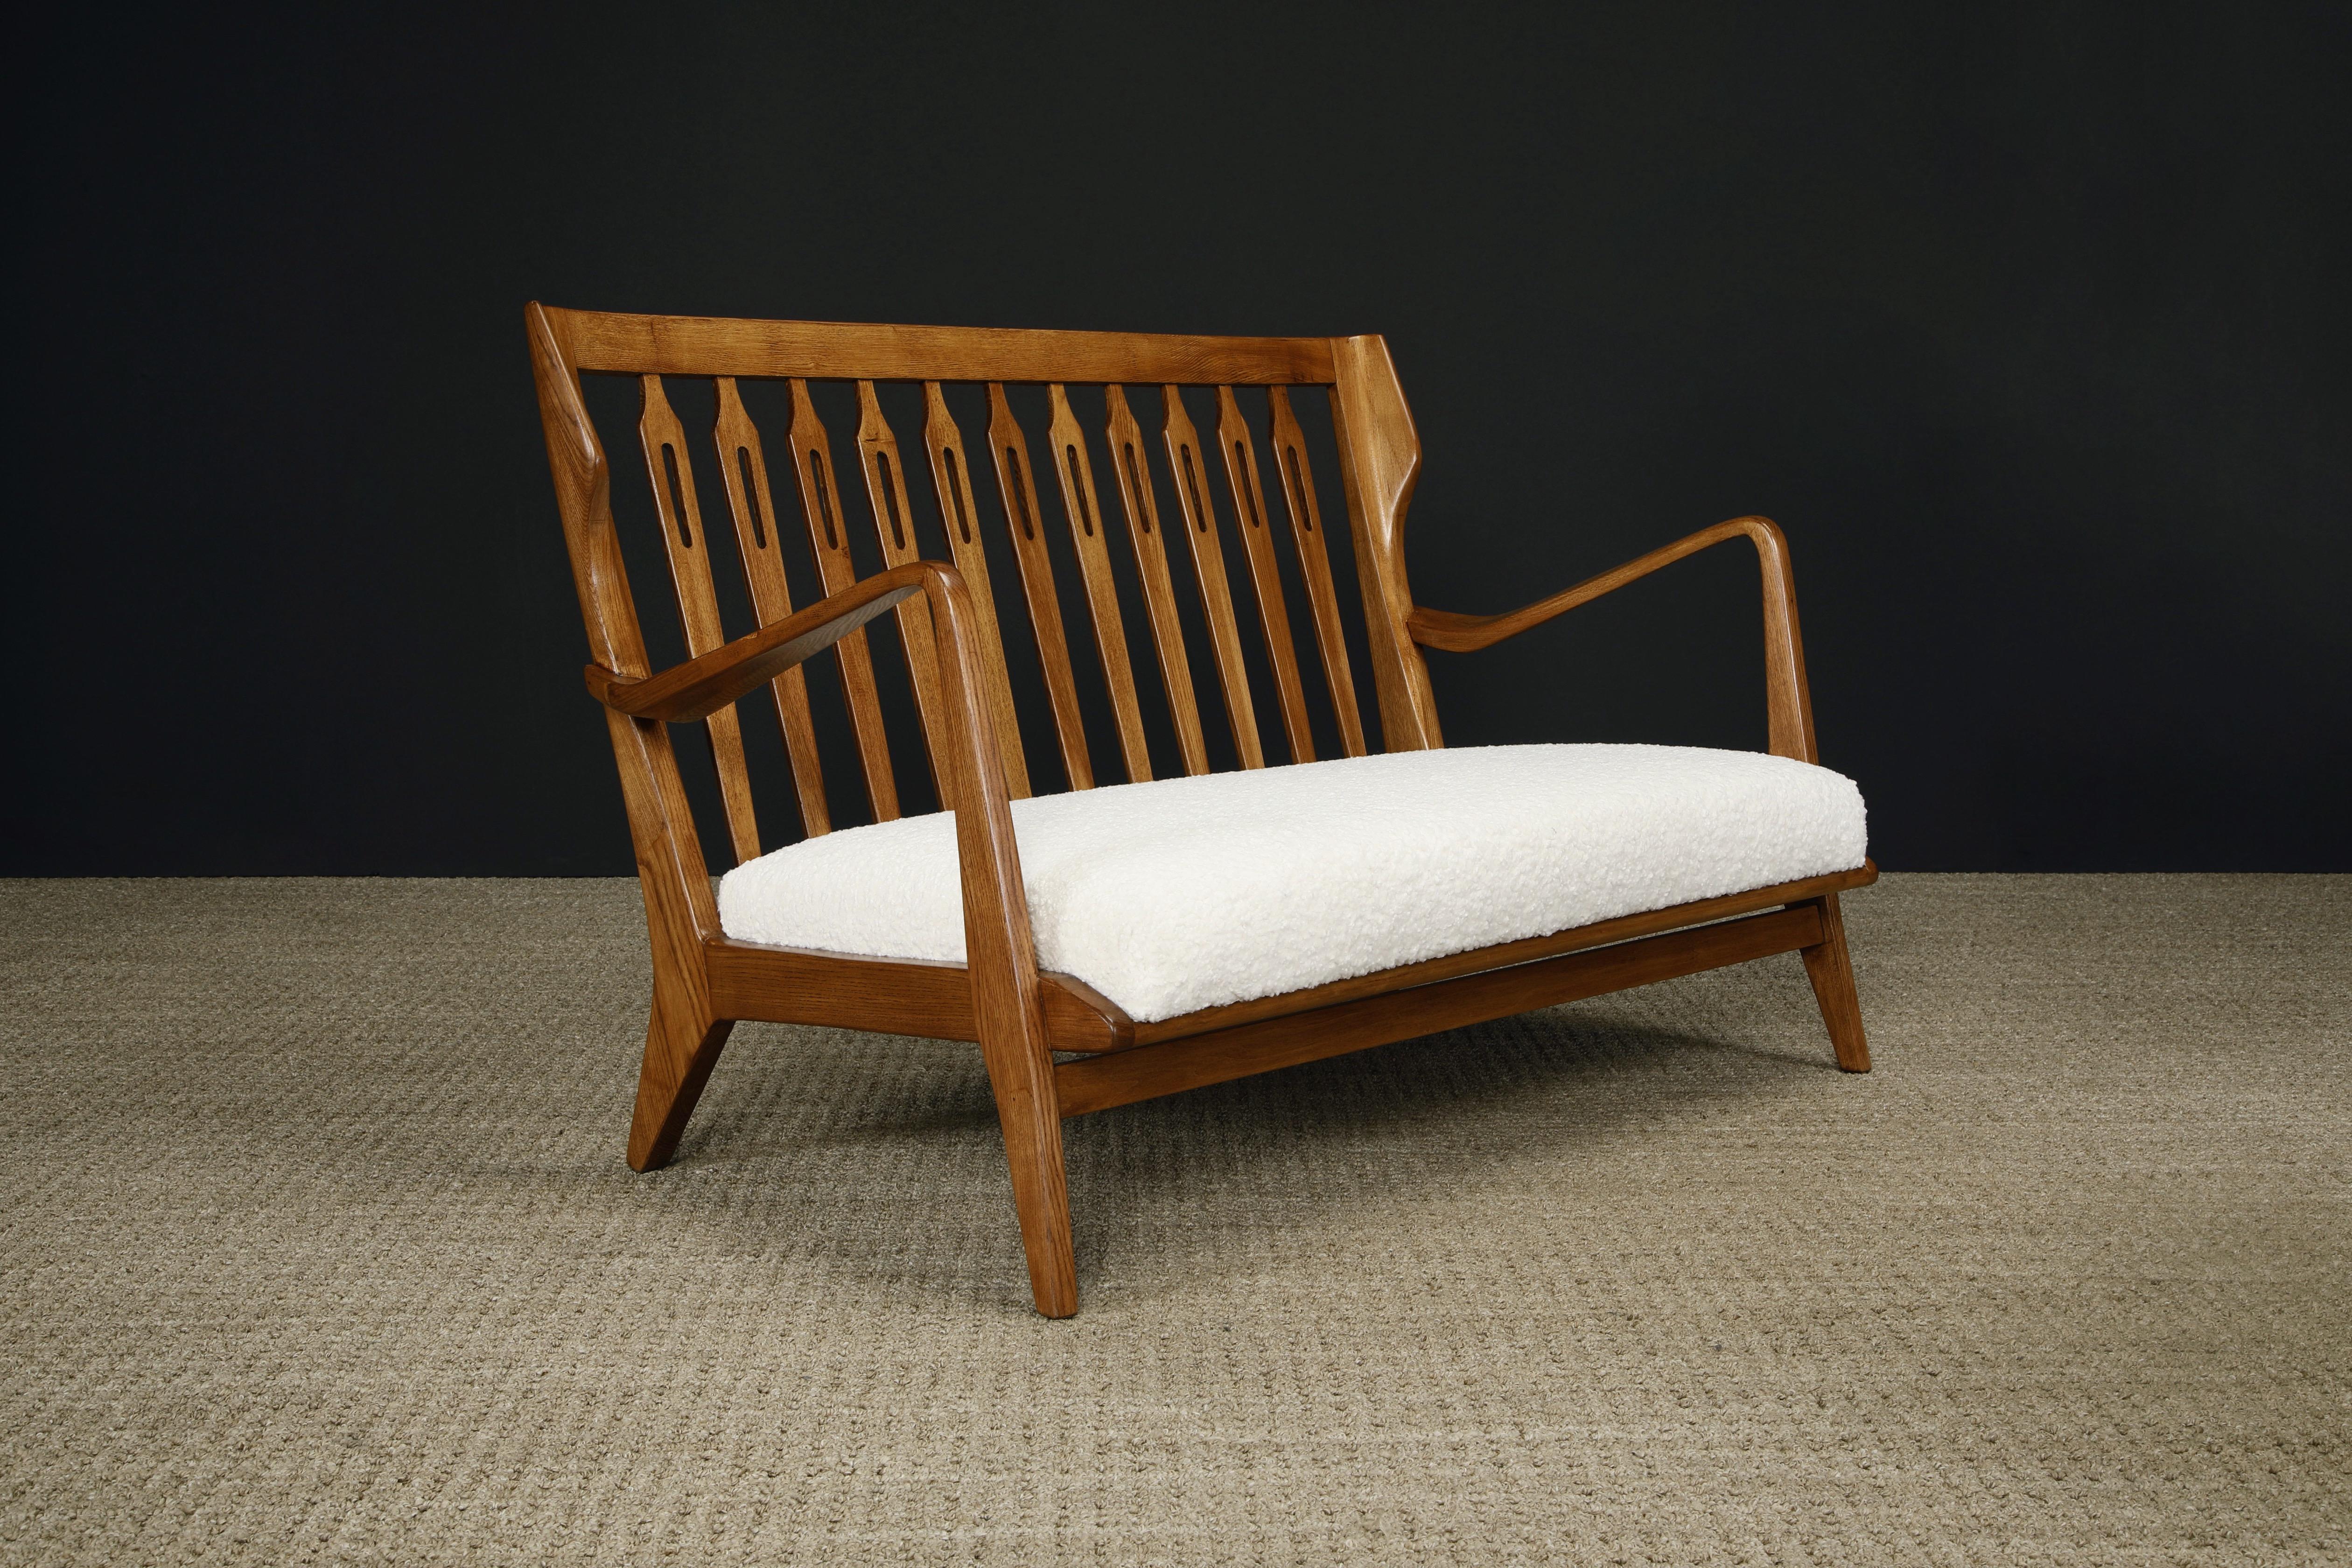 Rare Settee by Gio Ponti for Cassina, Refinished and Reupholstered, Italy 1950s For Sale 10